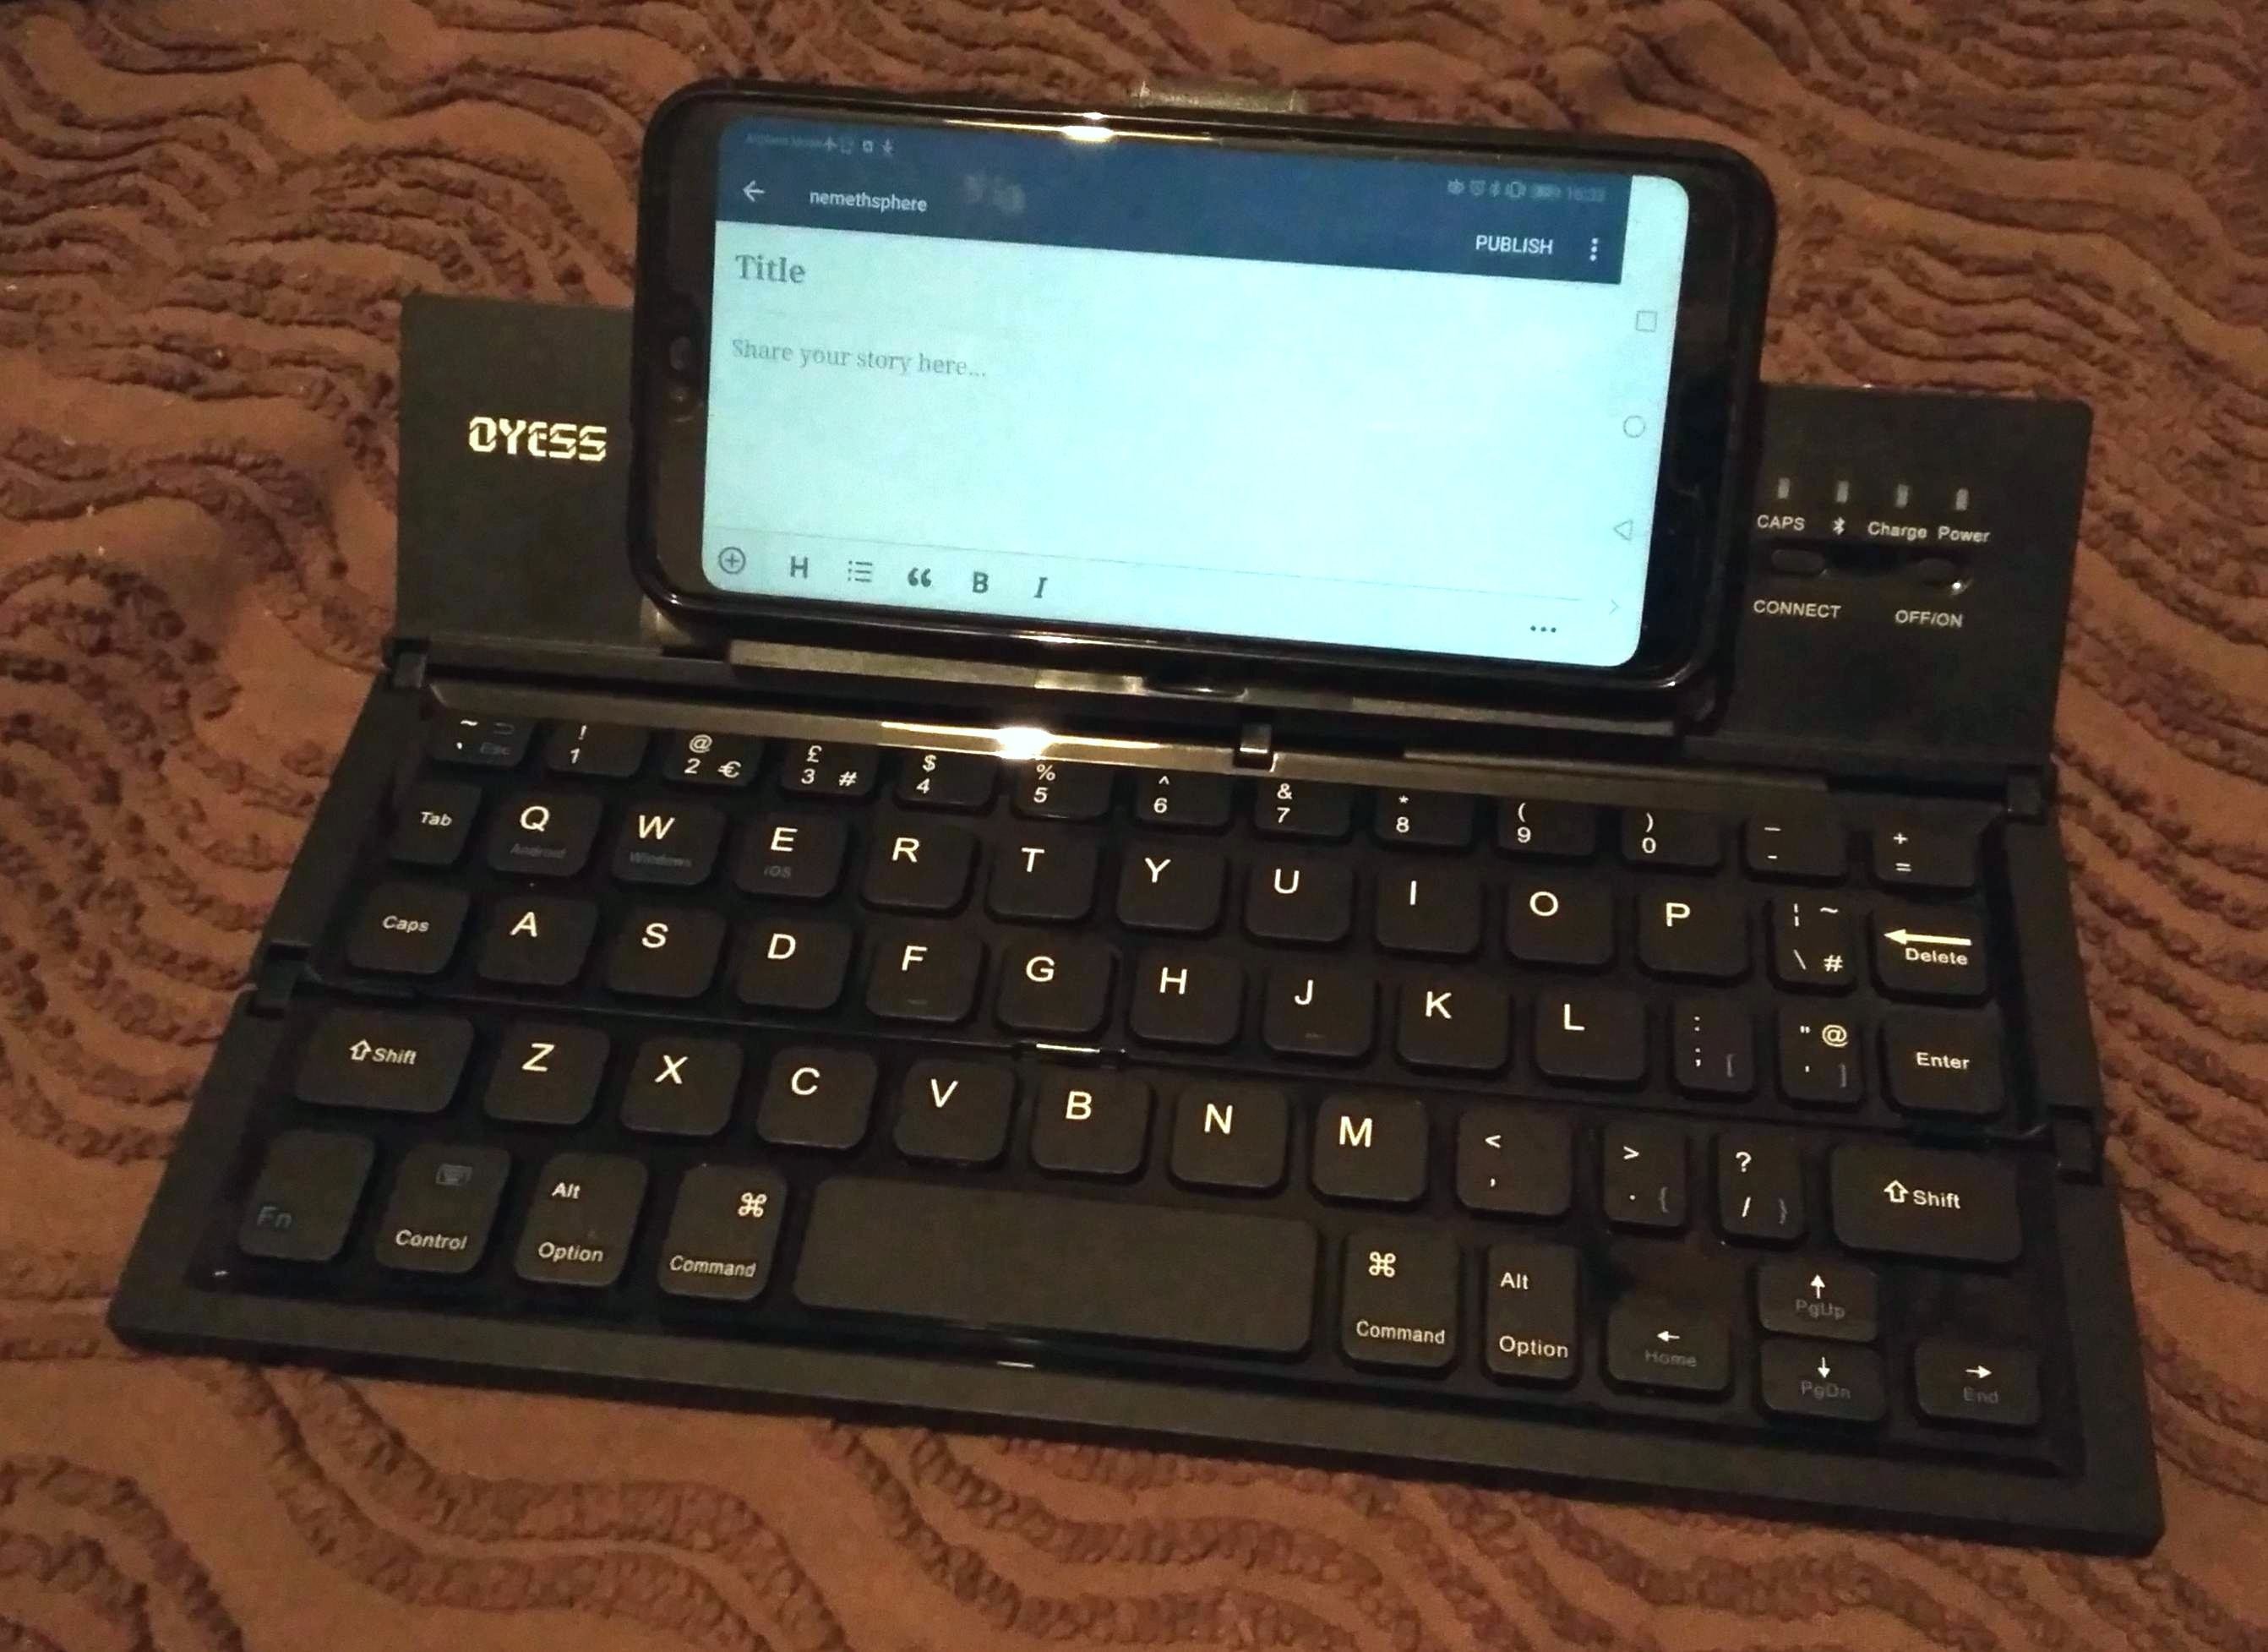 The Oyess folding Bluetooth keyboard, with my phone (in its case) on the built-in stand.